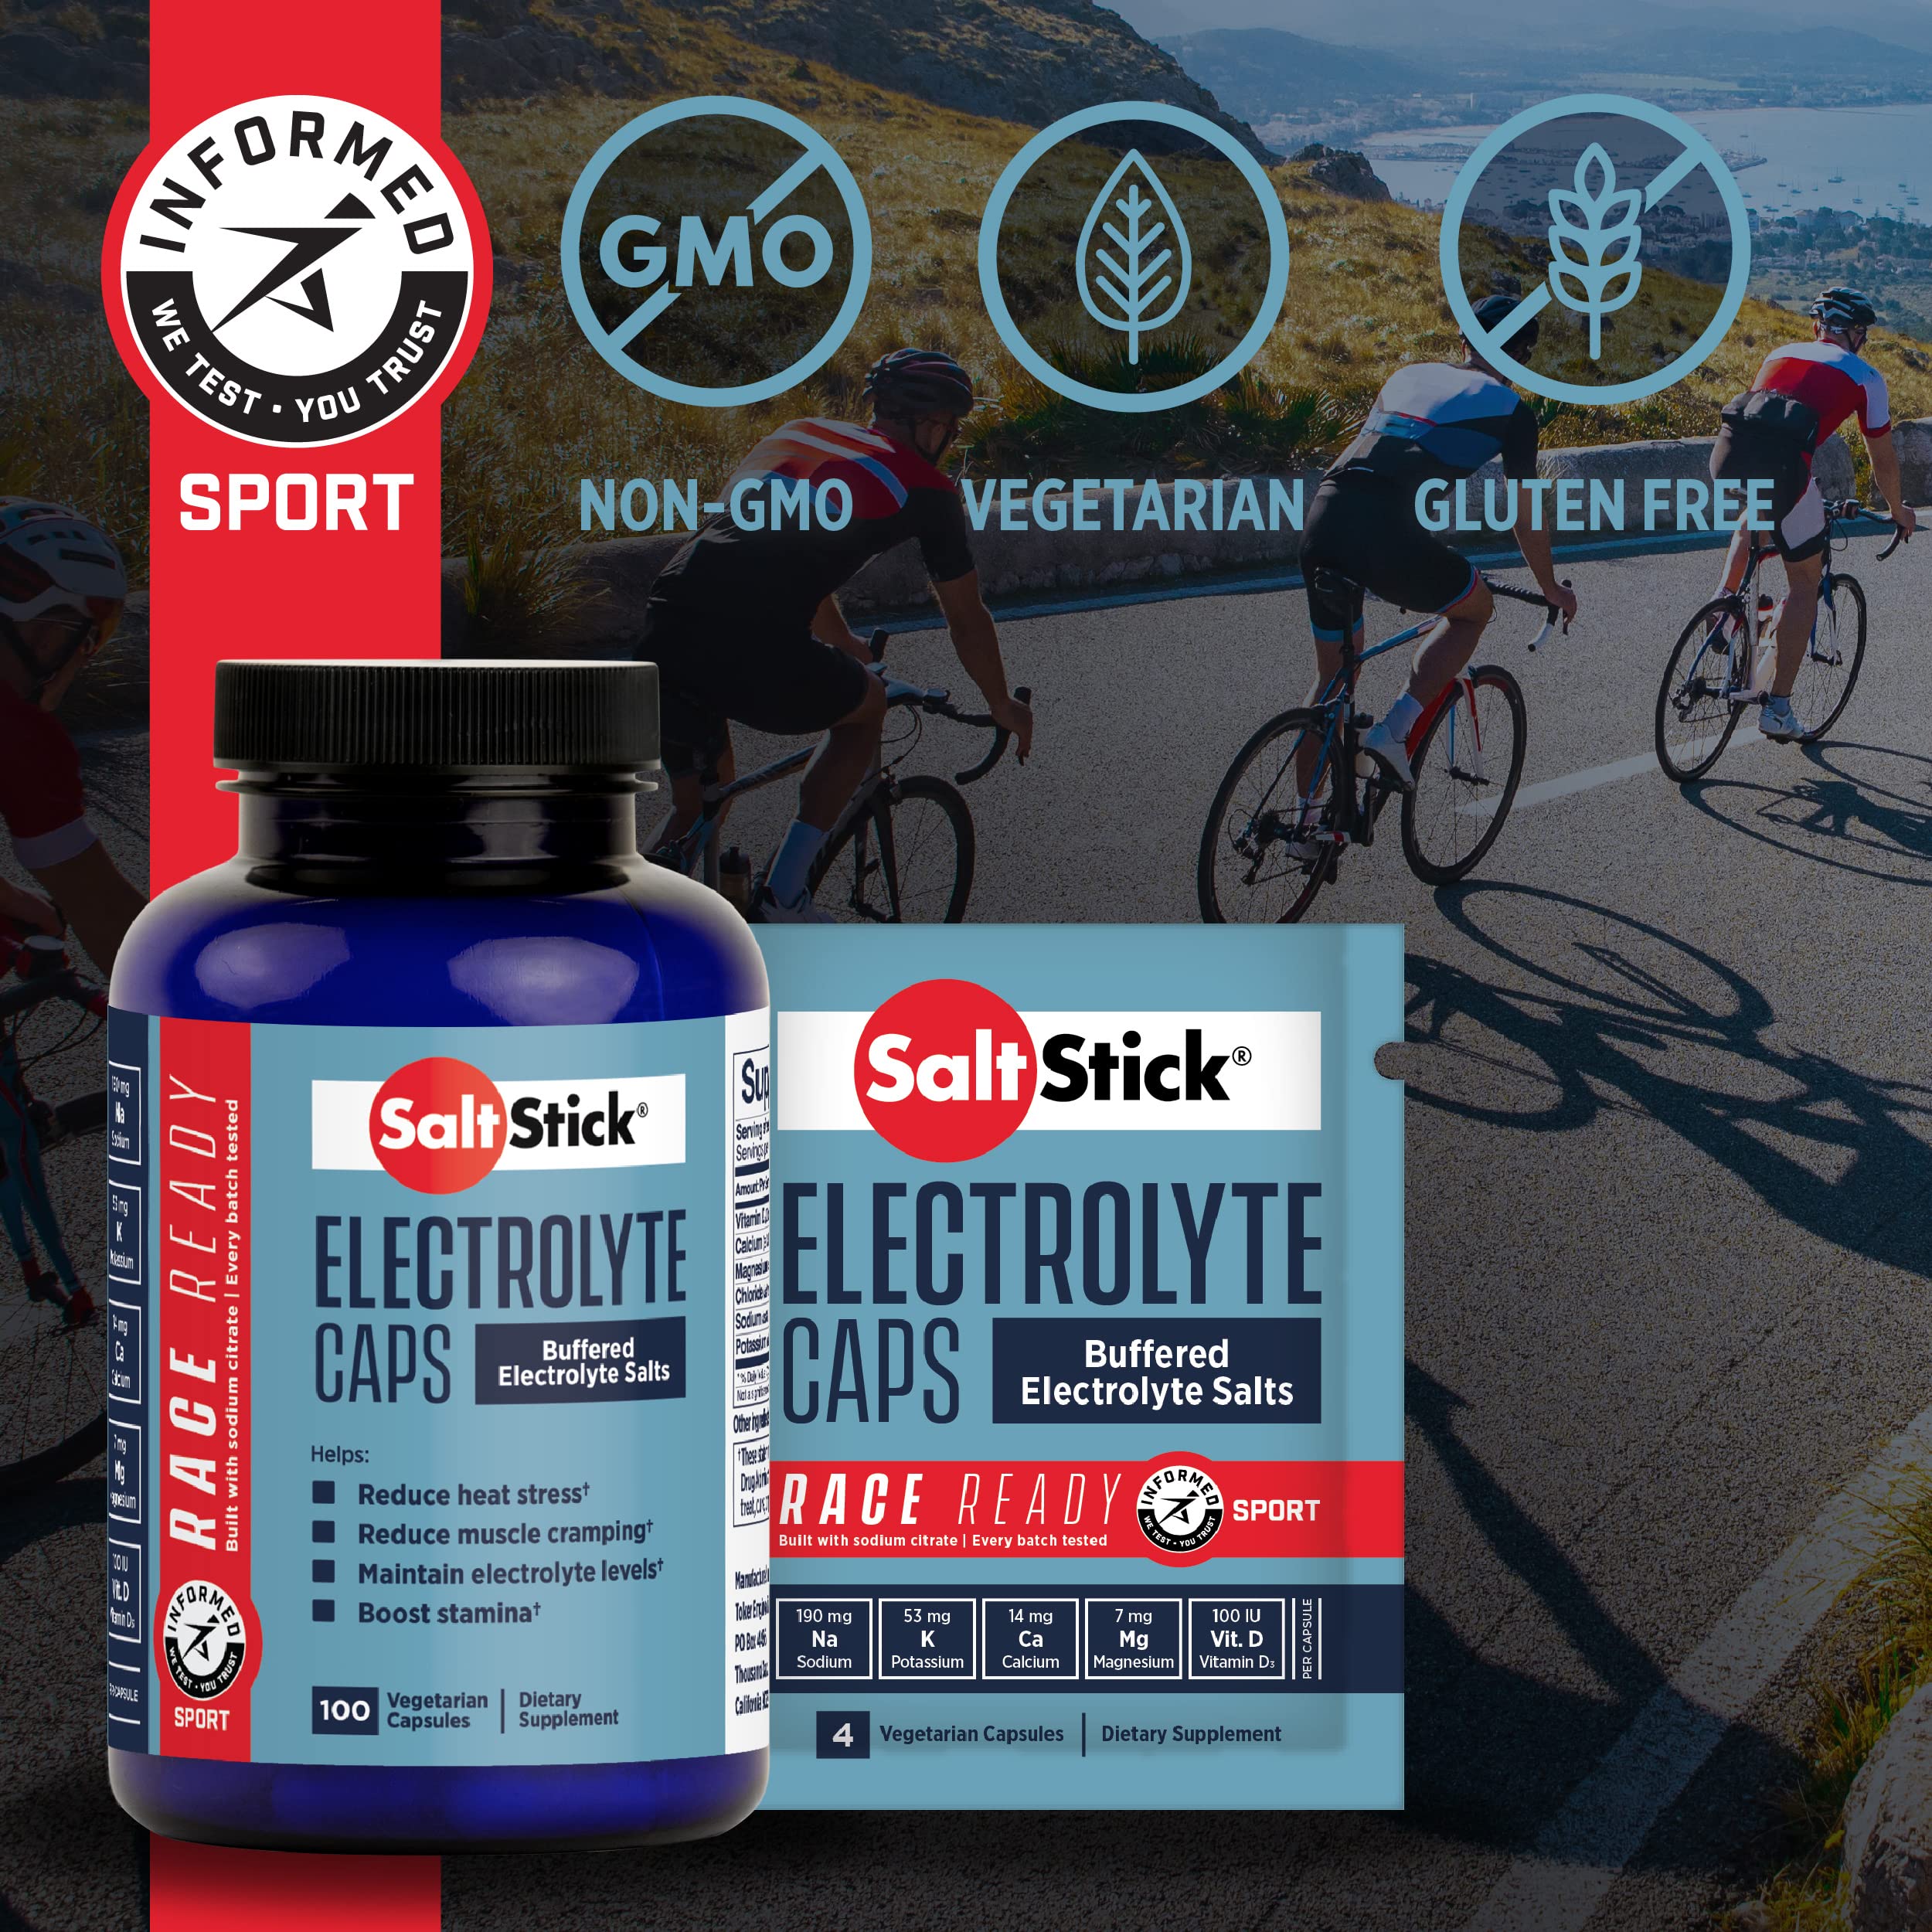 SaltStick Race Ready Caps, Informed Sport Certified Electrolyte Replacement Capsules with Sodium Citrate to Reduce Heat Stress, Muscle Cramping and Maintain Electrolyte Levels, 100 Count